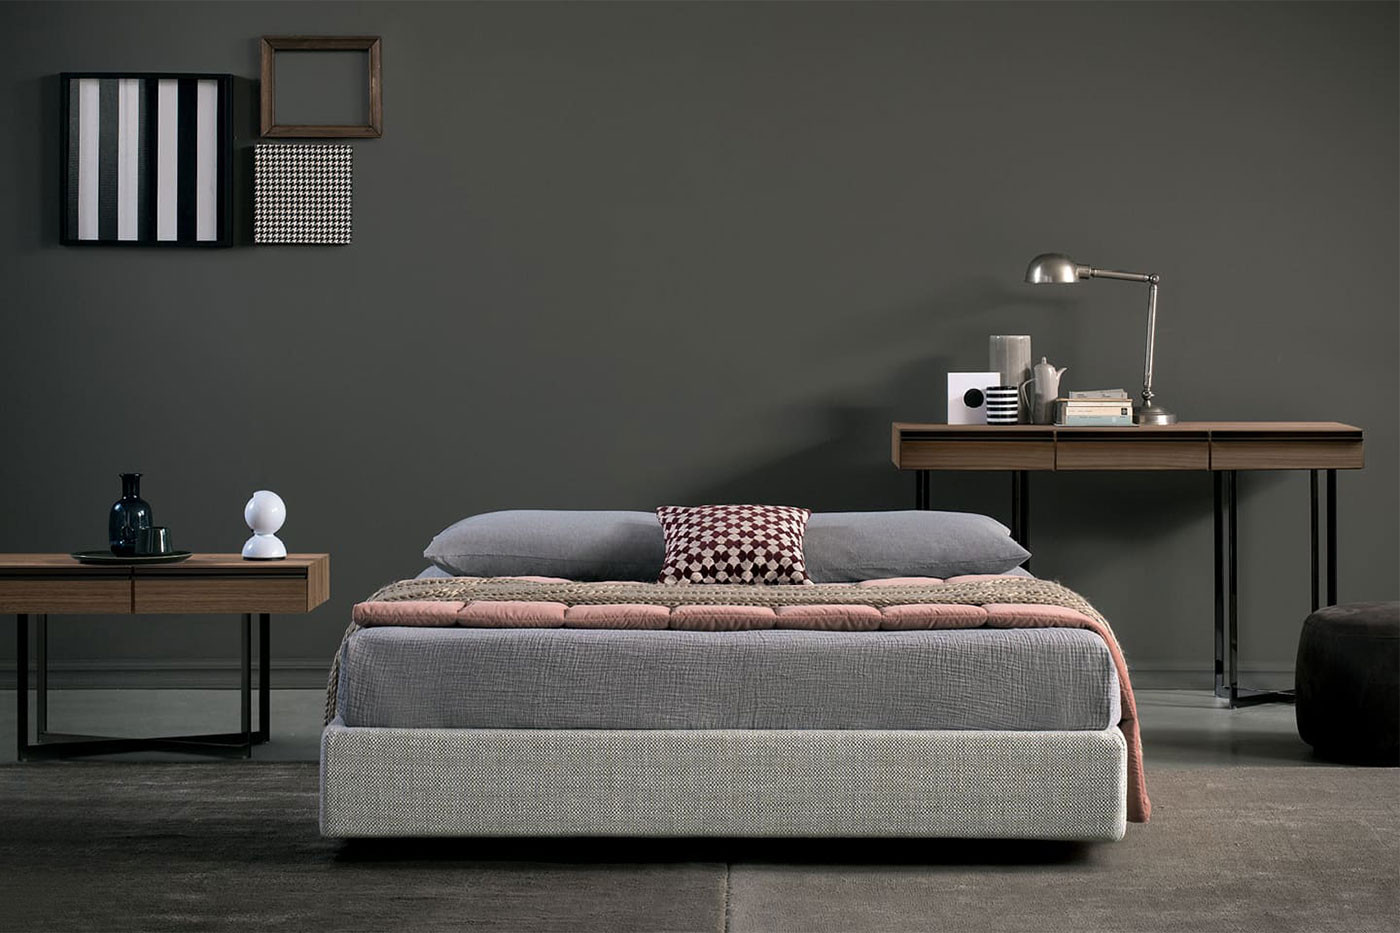 A space saving upholstered bed without headboard or footboard, available with or without storage